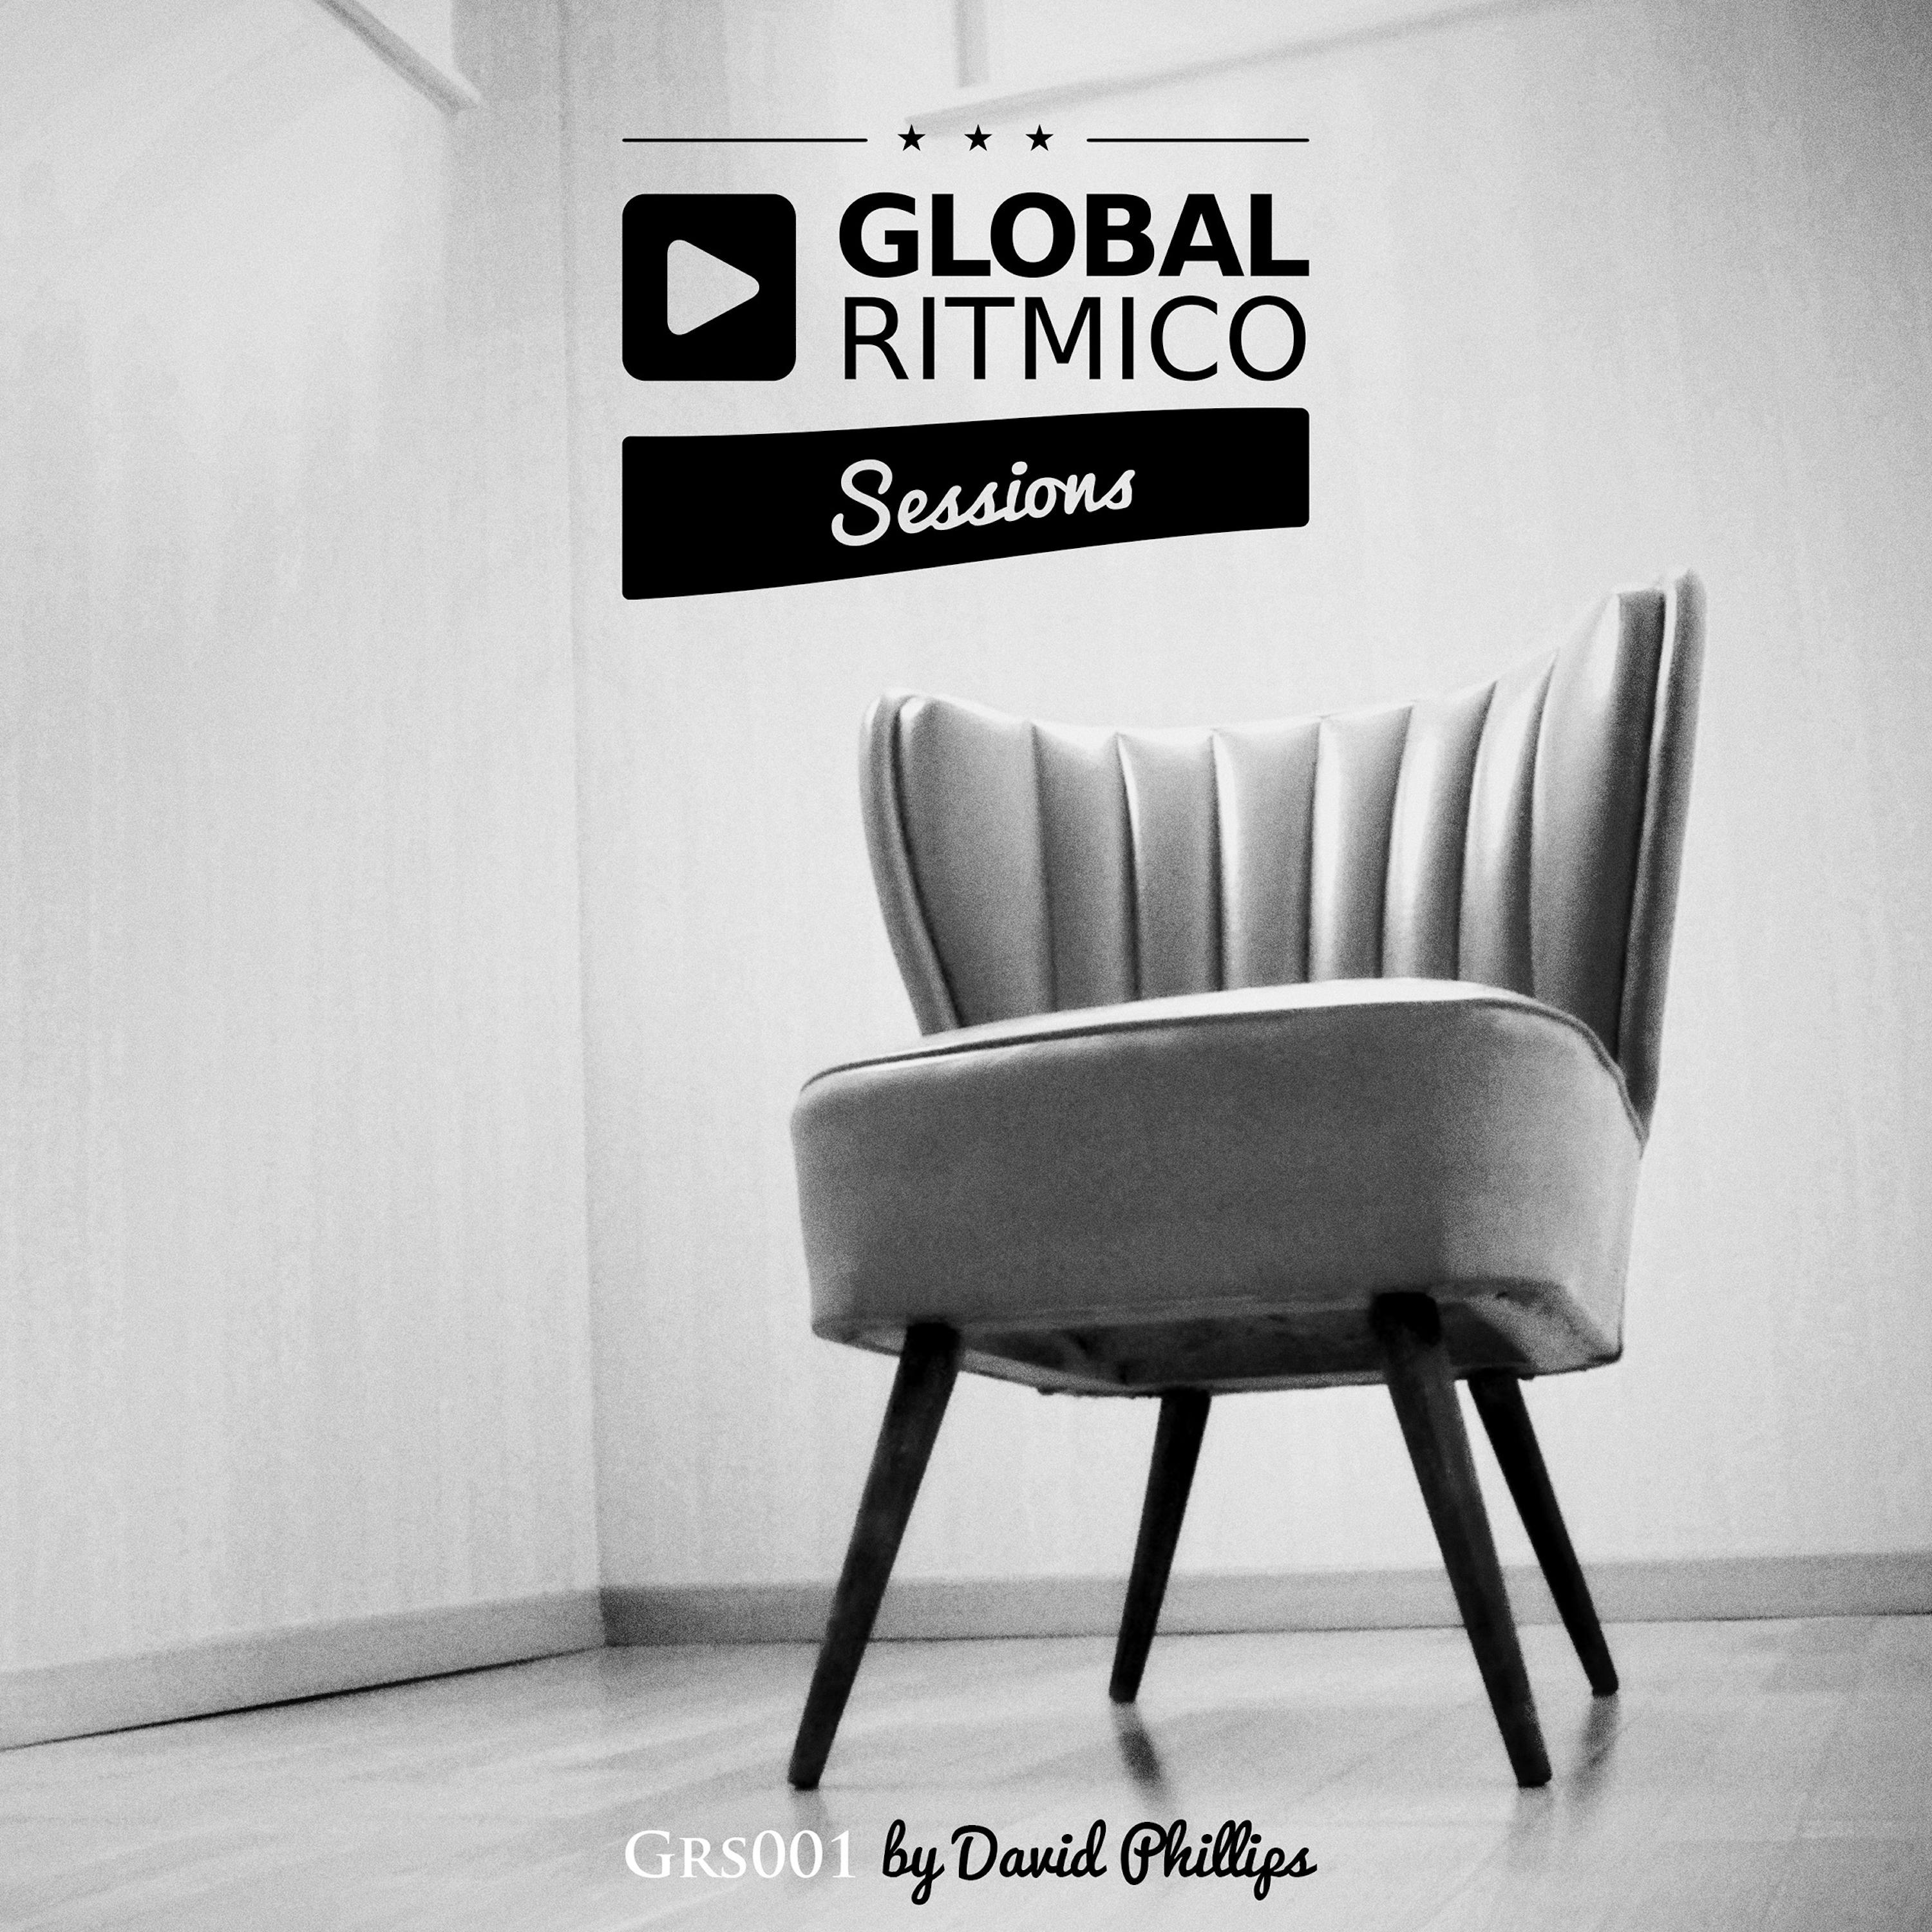 GLOBAL RITMICO SESSIONS #1 - By David Phillips